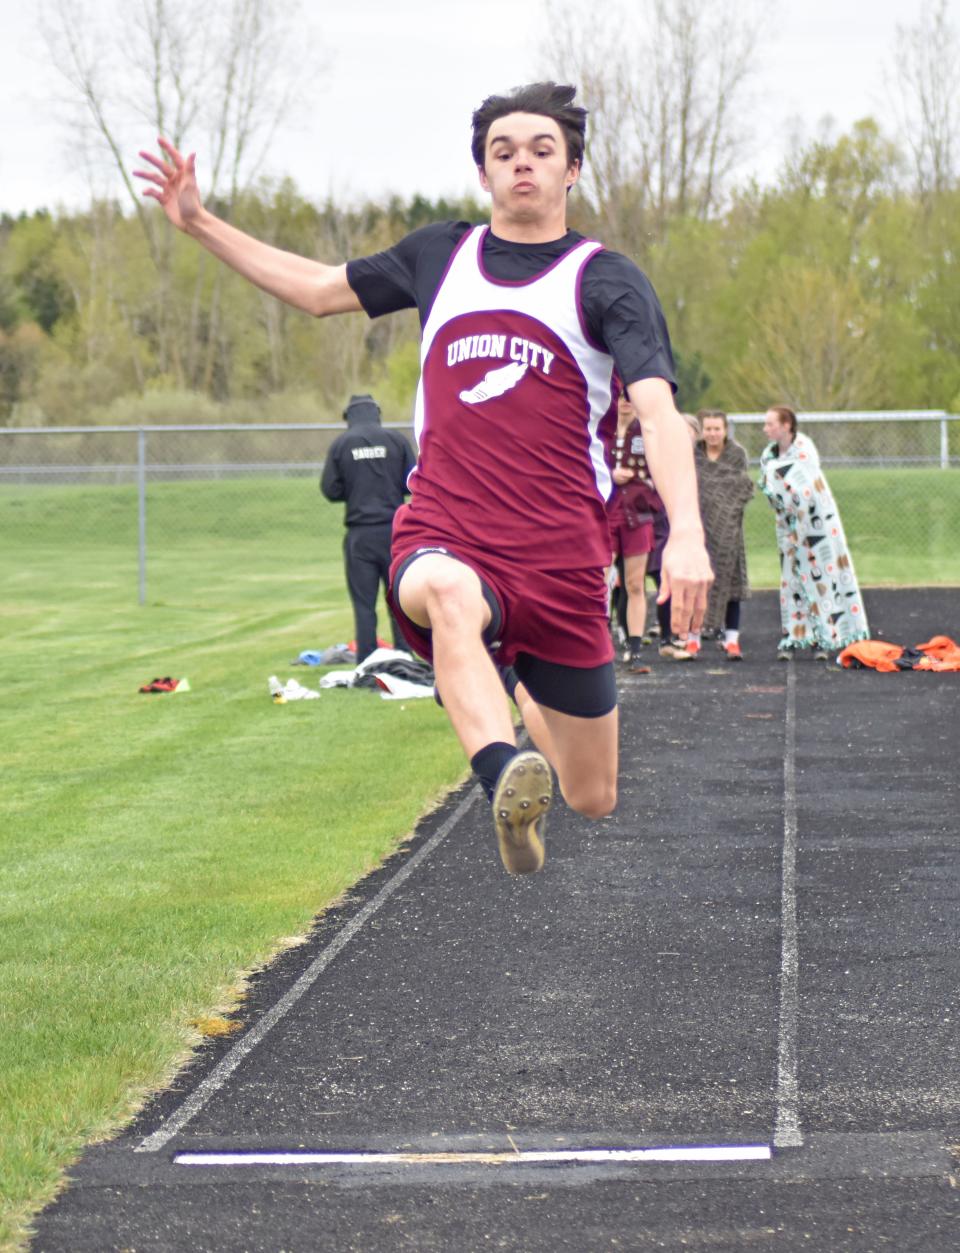 Union City's Rick Austin cleared the 20 foot mark in the long jump Wednesday, taking first place in the Big 8 double dual